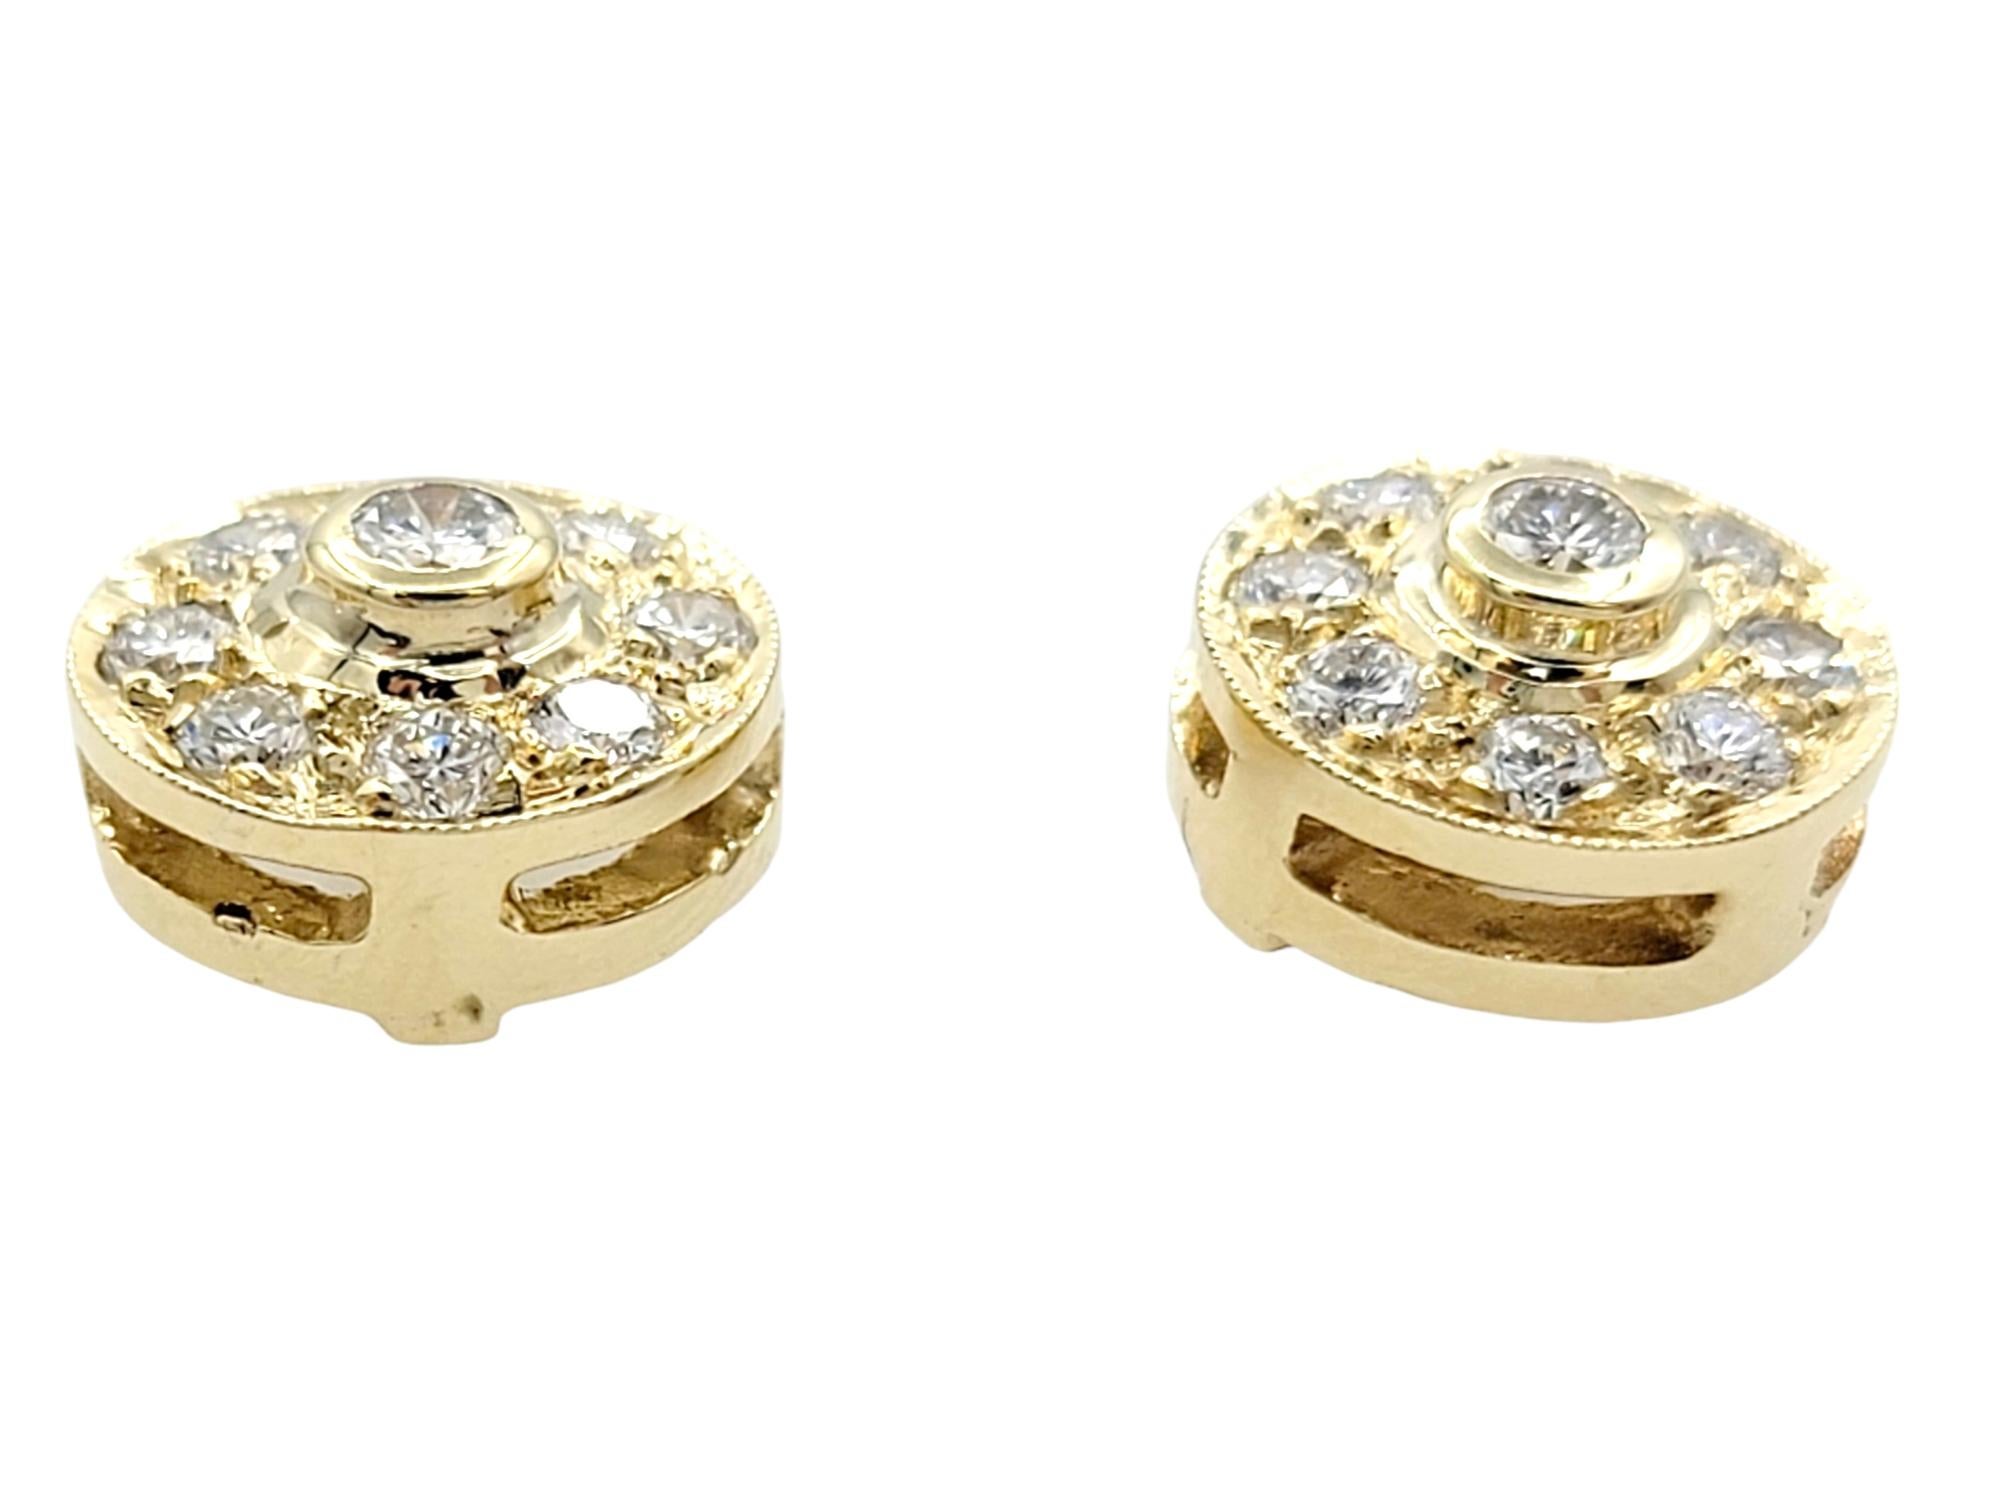 These diamond earrings, set in lustrous 14 karat yellow gold, are a radiant and captivating pair. At the center of each earring is a bezel set brilliant round diamond, serving as the focal point. Surrounding the central diamond is an array of